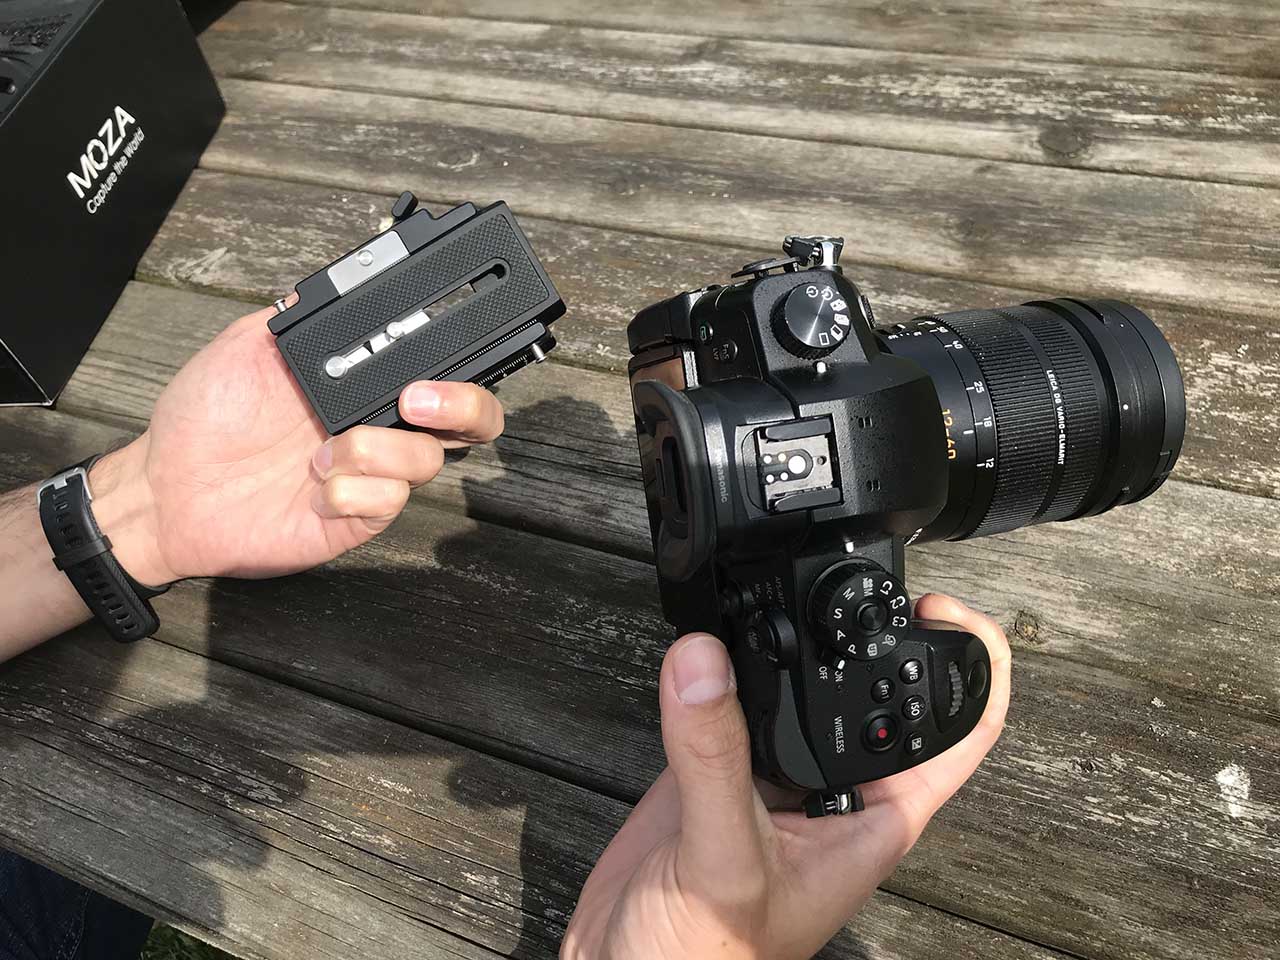 How to balance your camera on the Gudsen Moza Air 2: attach baseplate